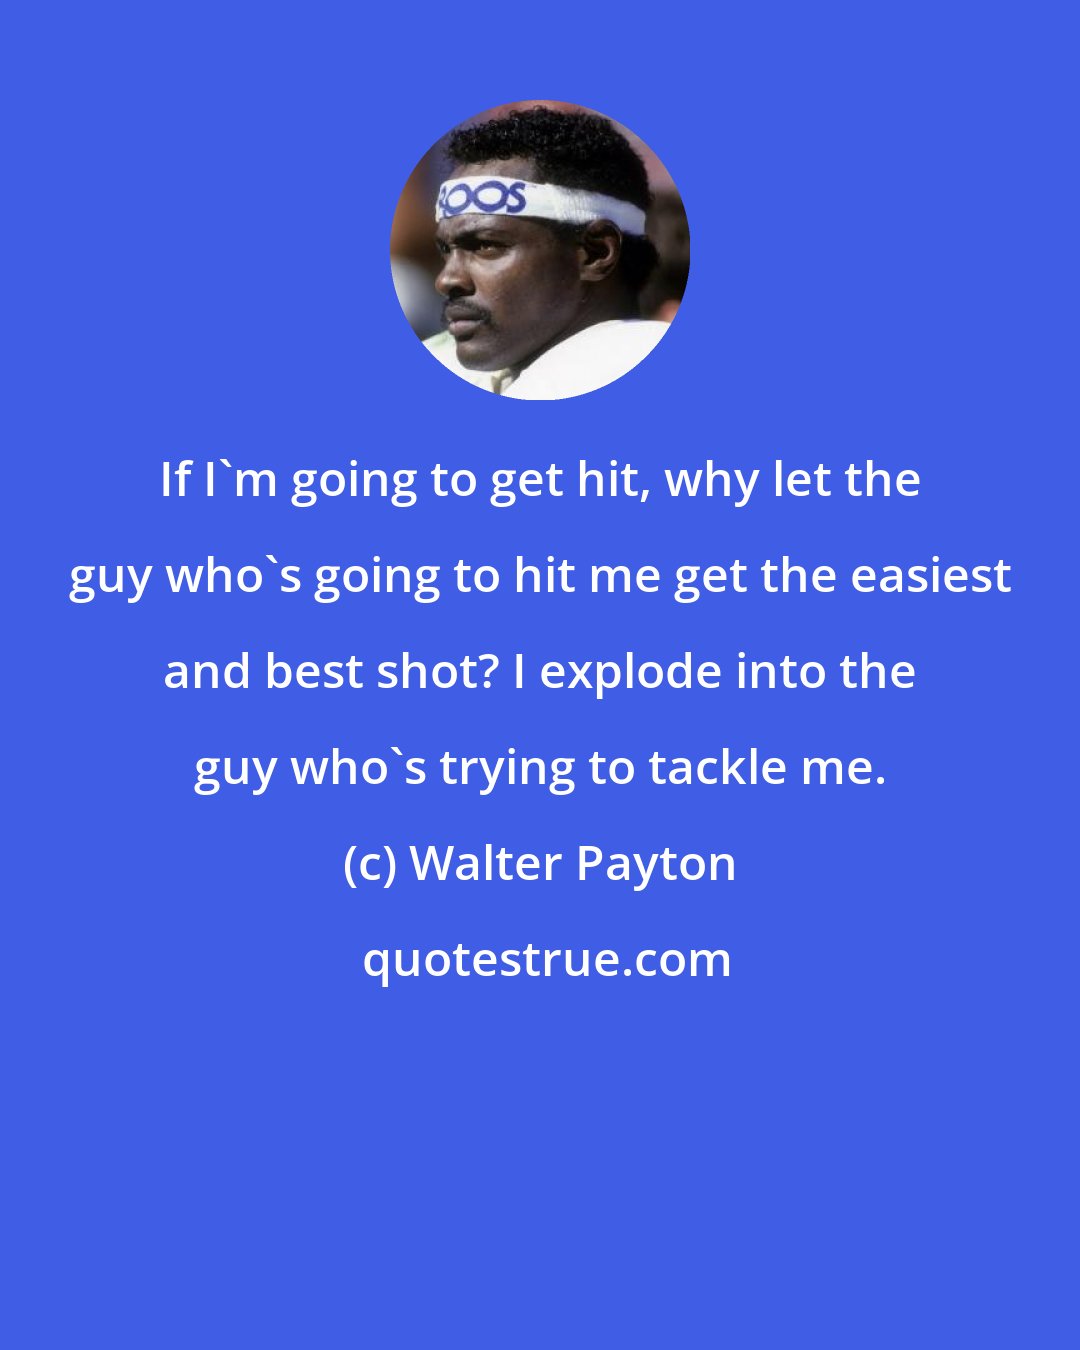 Walter Payton: If I'm going to get hit, why let the guy who's going to hit me get the easiest and best shot? I explode into the guy who's trying to tackle me.